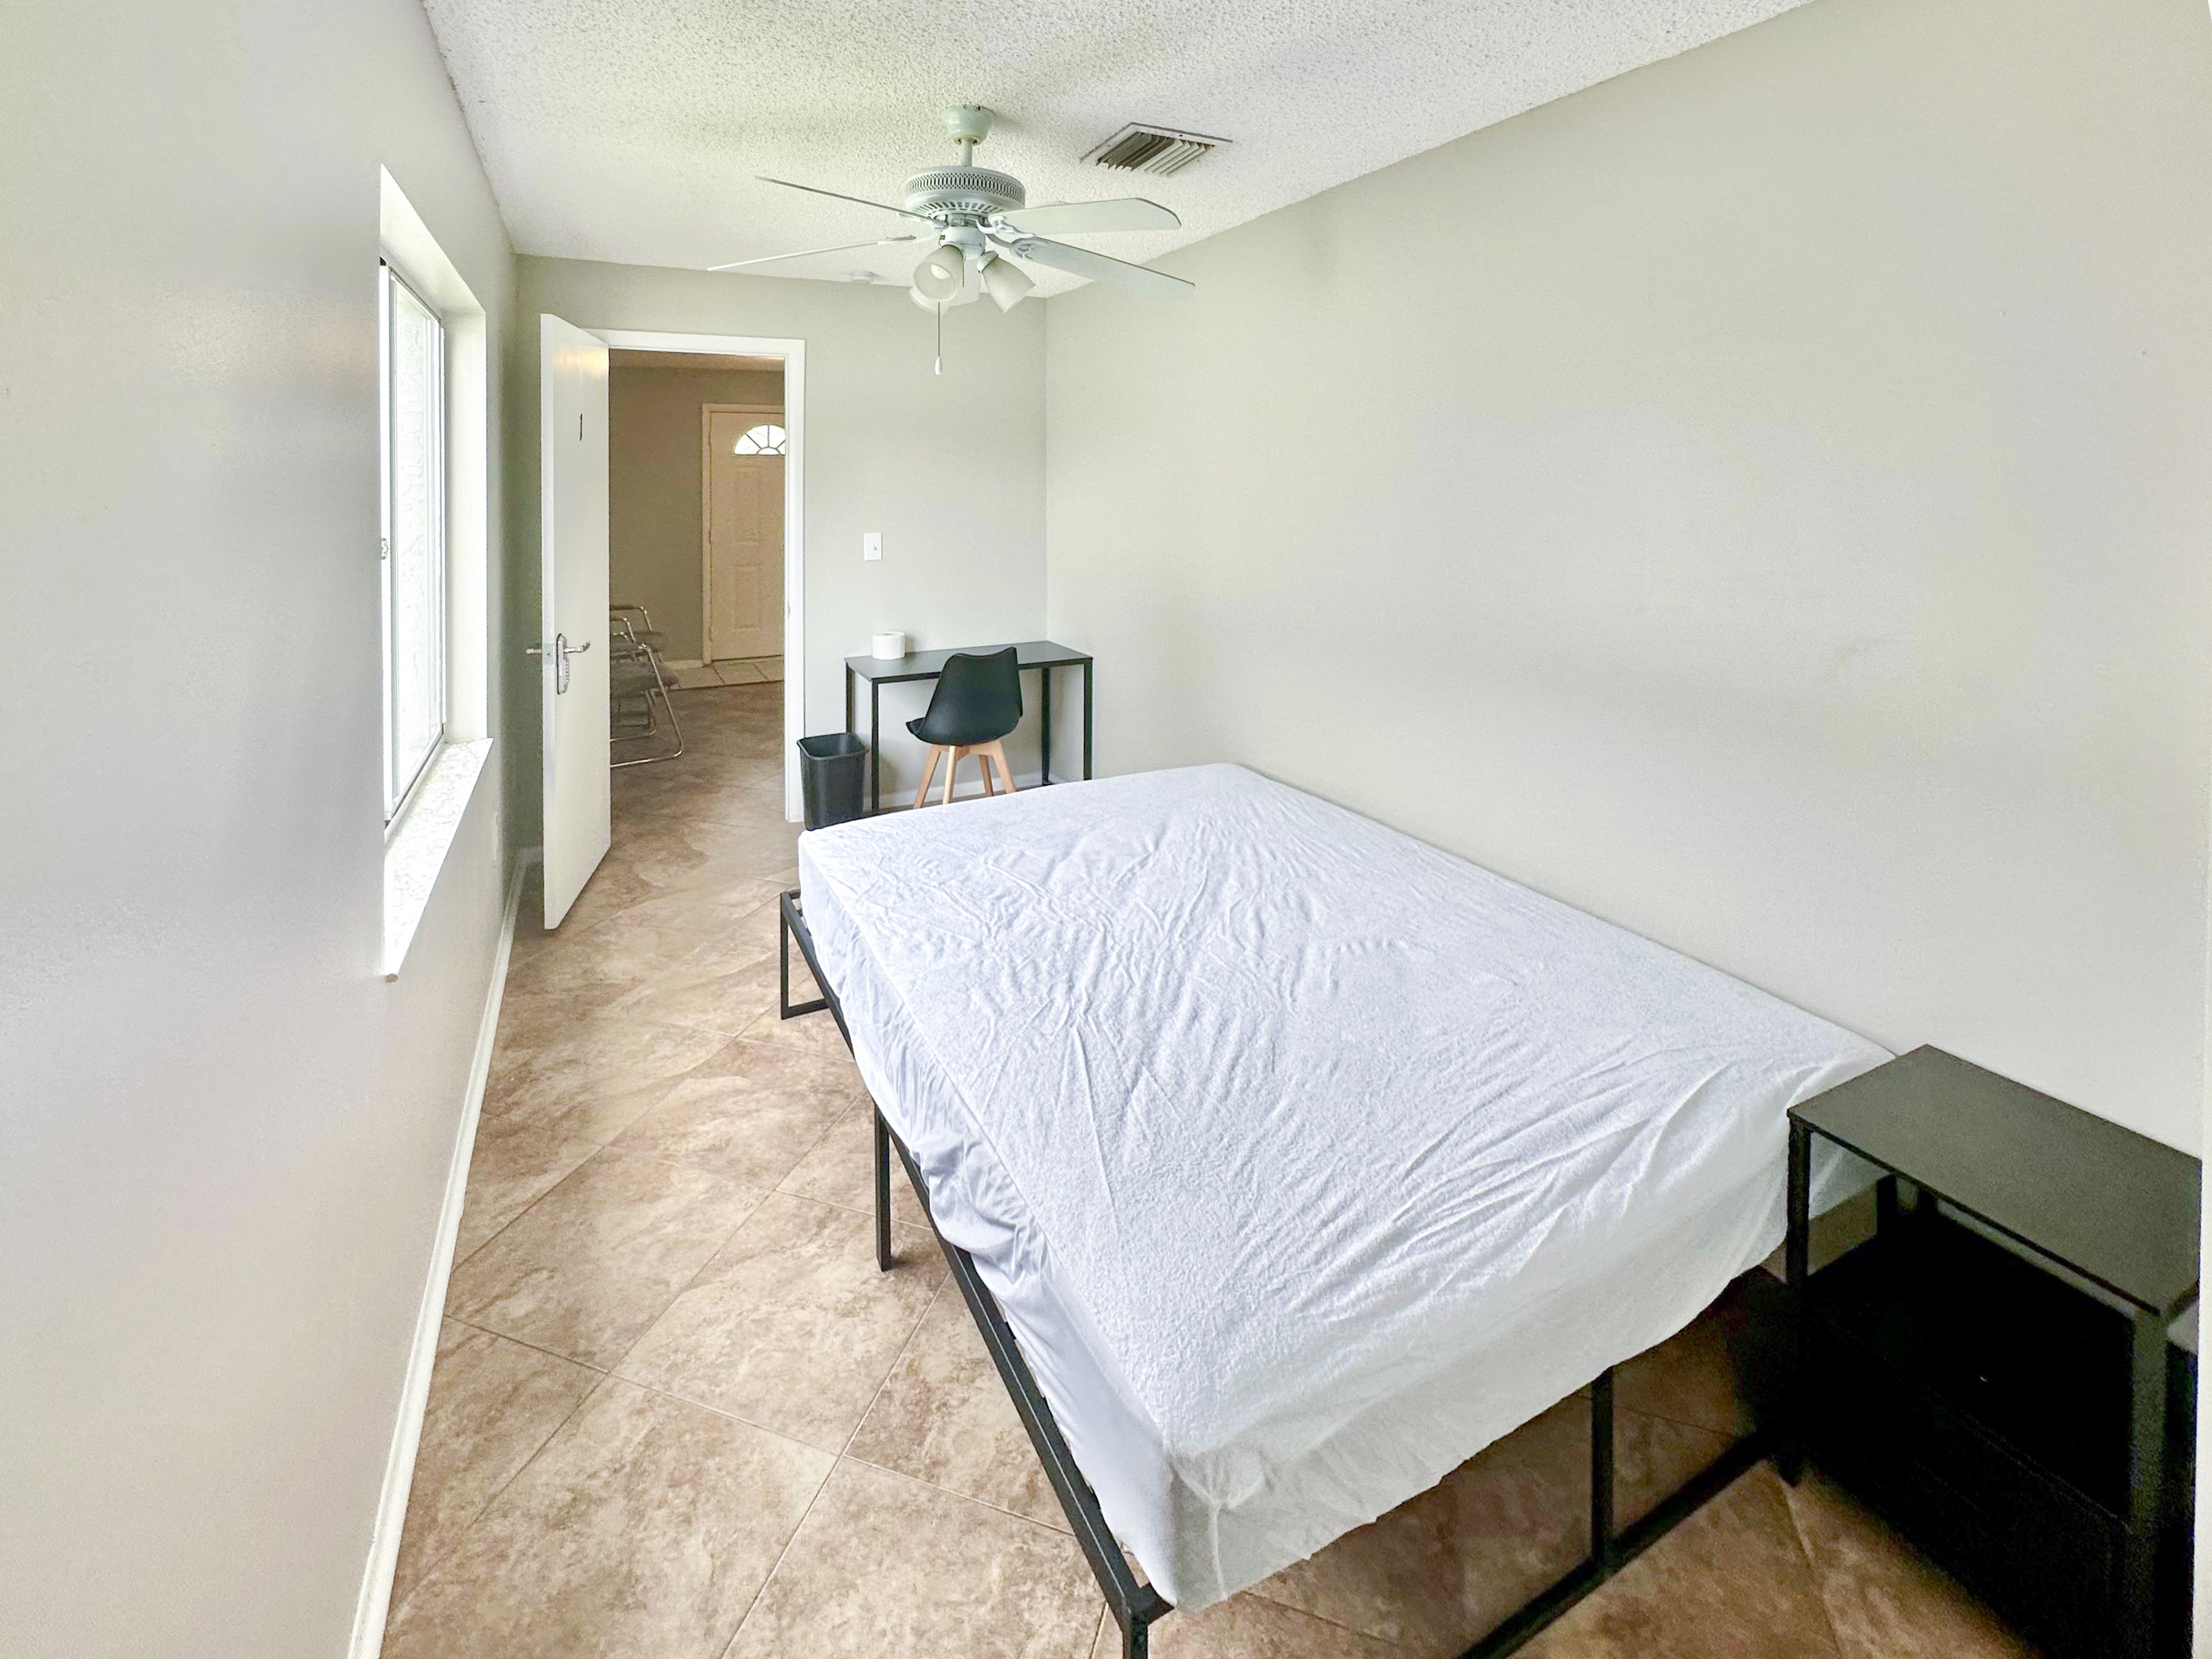 Rooms for rent with private entrance in Tampa, FL